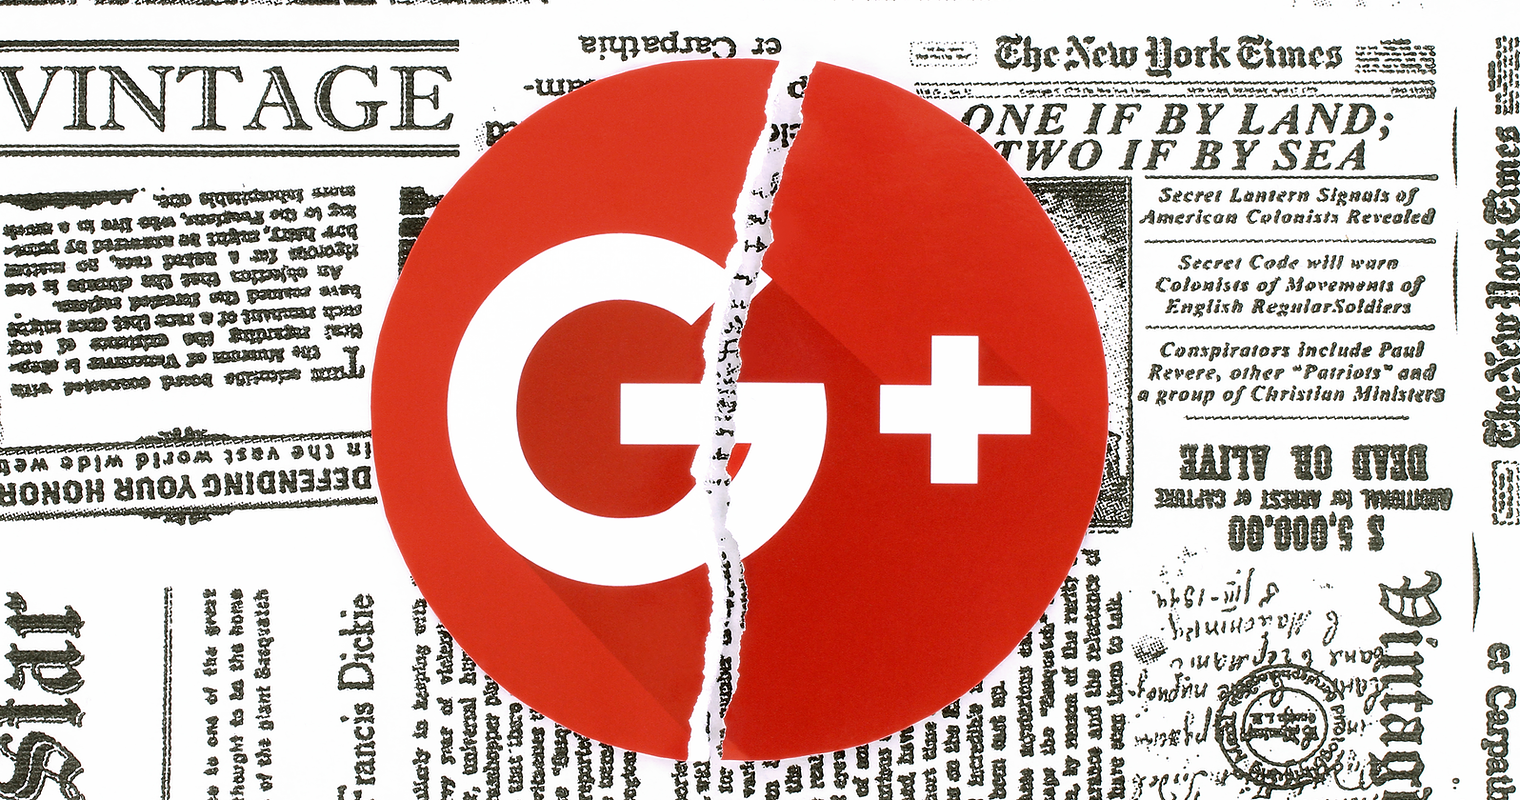 Google+ Public Posts to be Preserved by the Internet Archive’s Wayback Machine